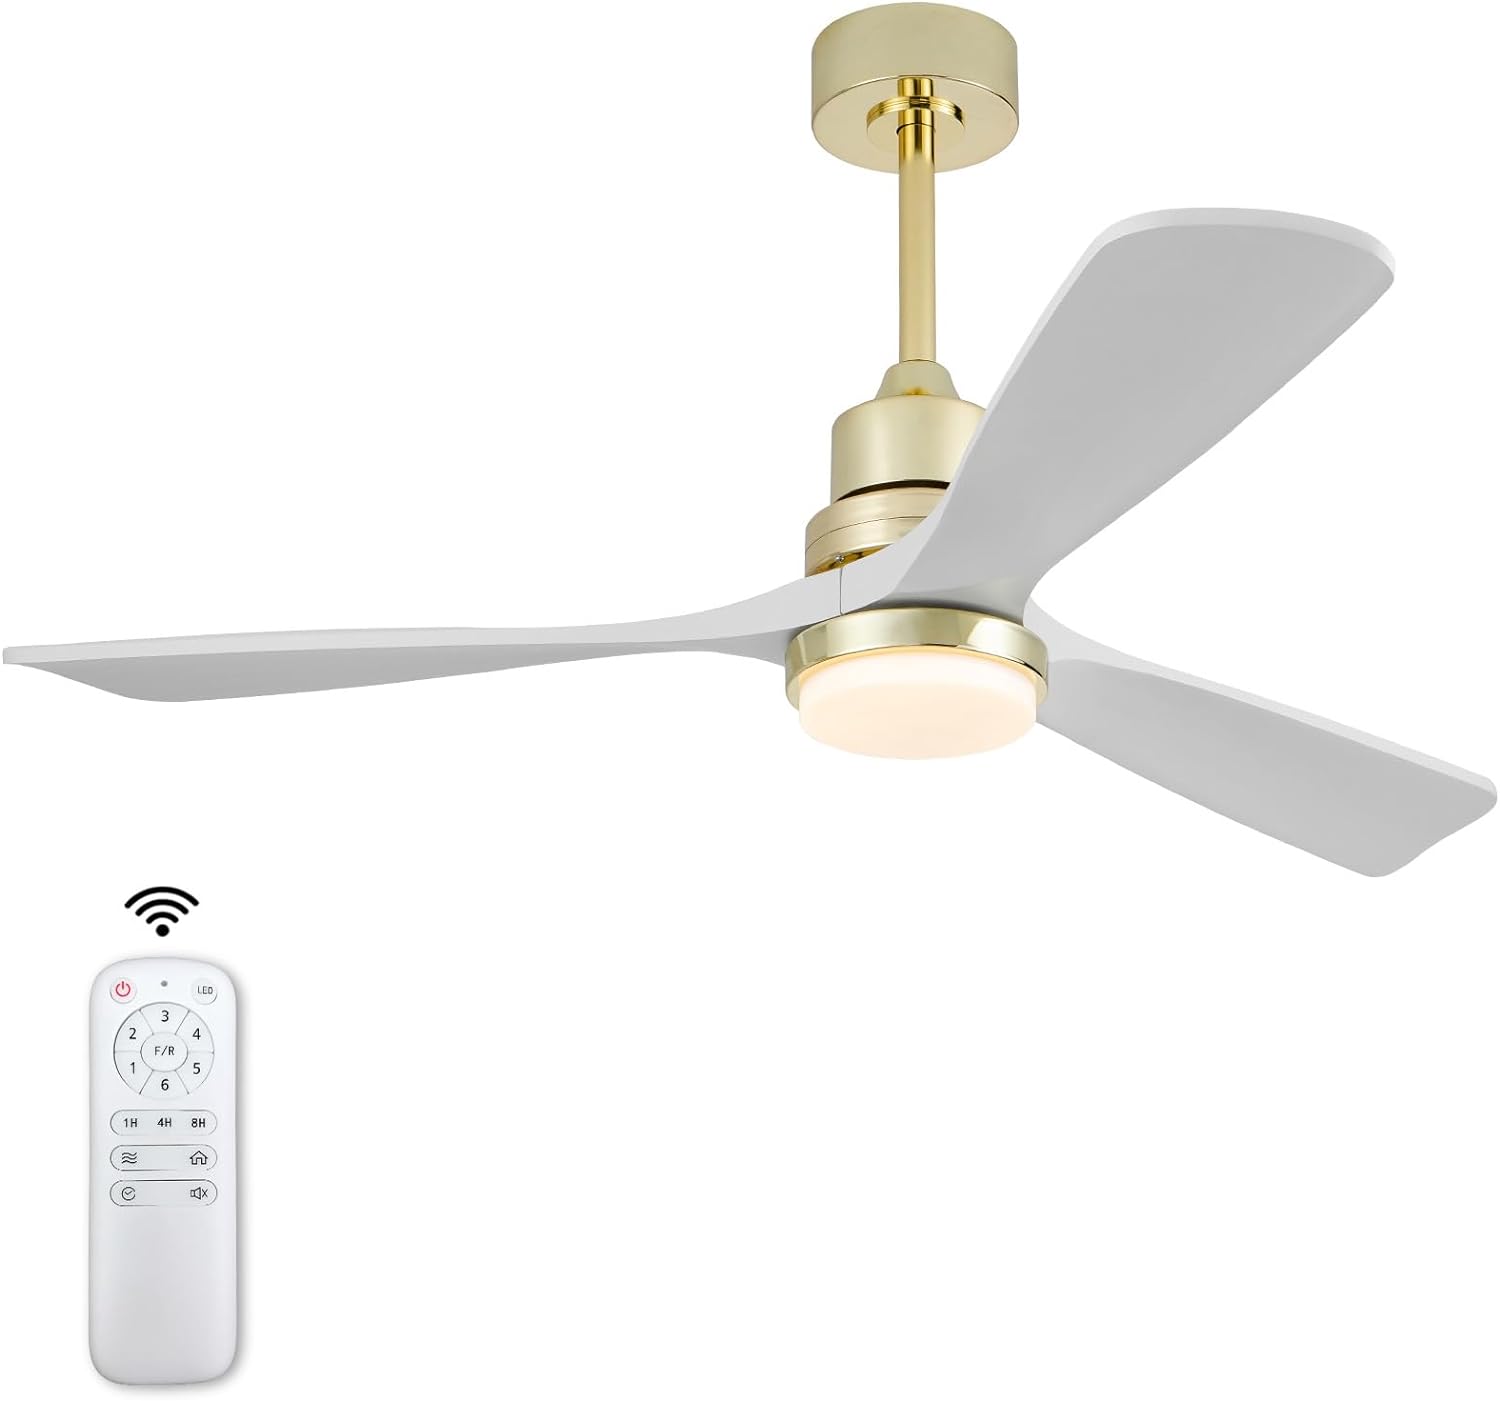 The design of this fan is not only functional but also aesthetically pleasing. The wood finish adds a touch of elegance to my spaces, making them feel cozy and inviting. The 52 size is perfect for our master room which is pretty big, providing excellent air circulation.The inclusion of both lights and a remote control is a significant convenience. The lights offer ample illumination, and the remote control allows me to adjust the fan speed, light intensity.The fan' performance is impressive. I